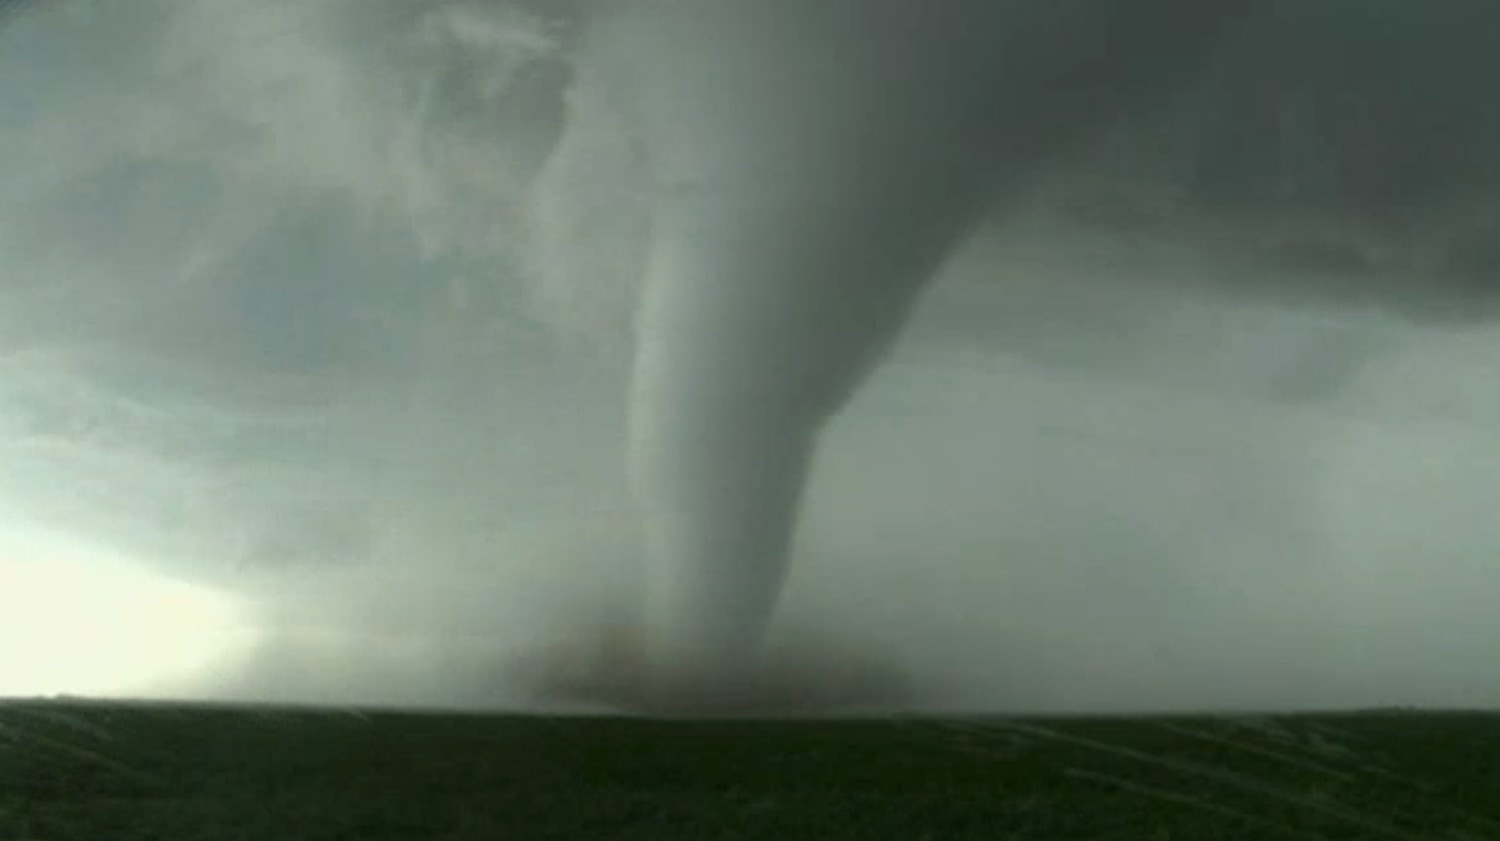 Cyclone vs. Tornado: Comparing Two Strong Storm Systems